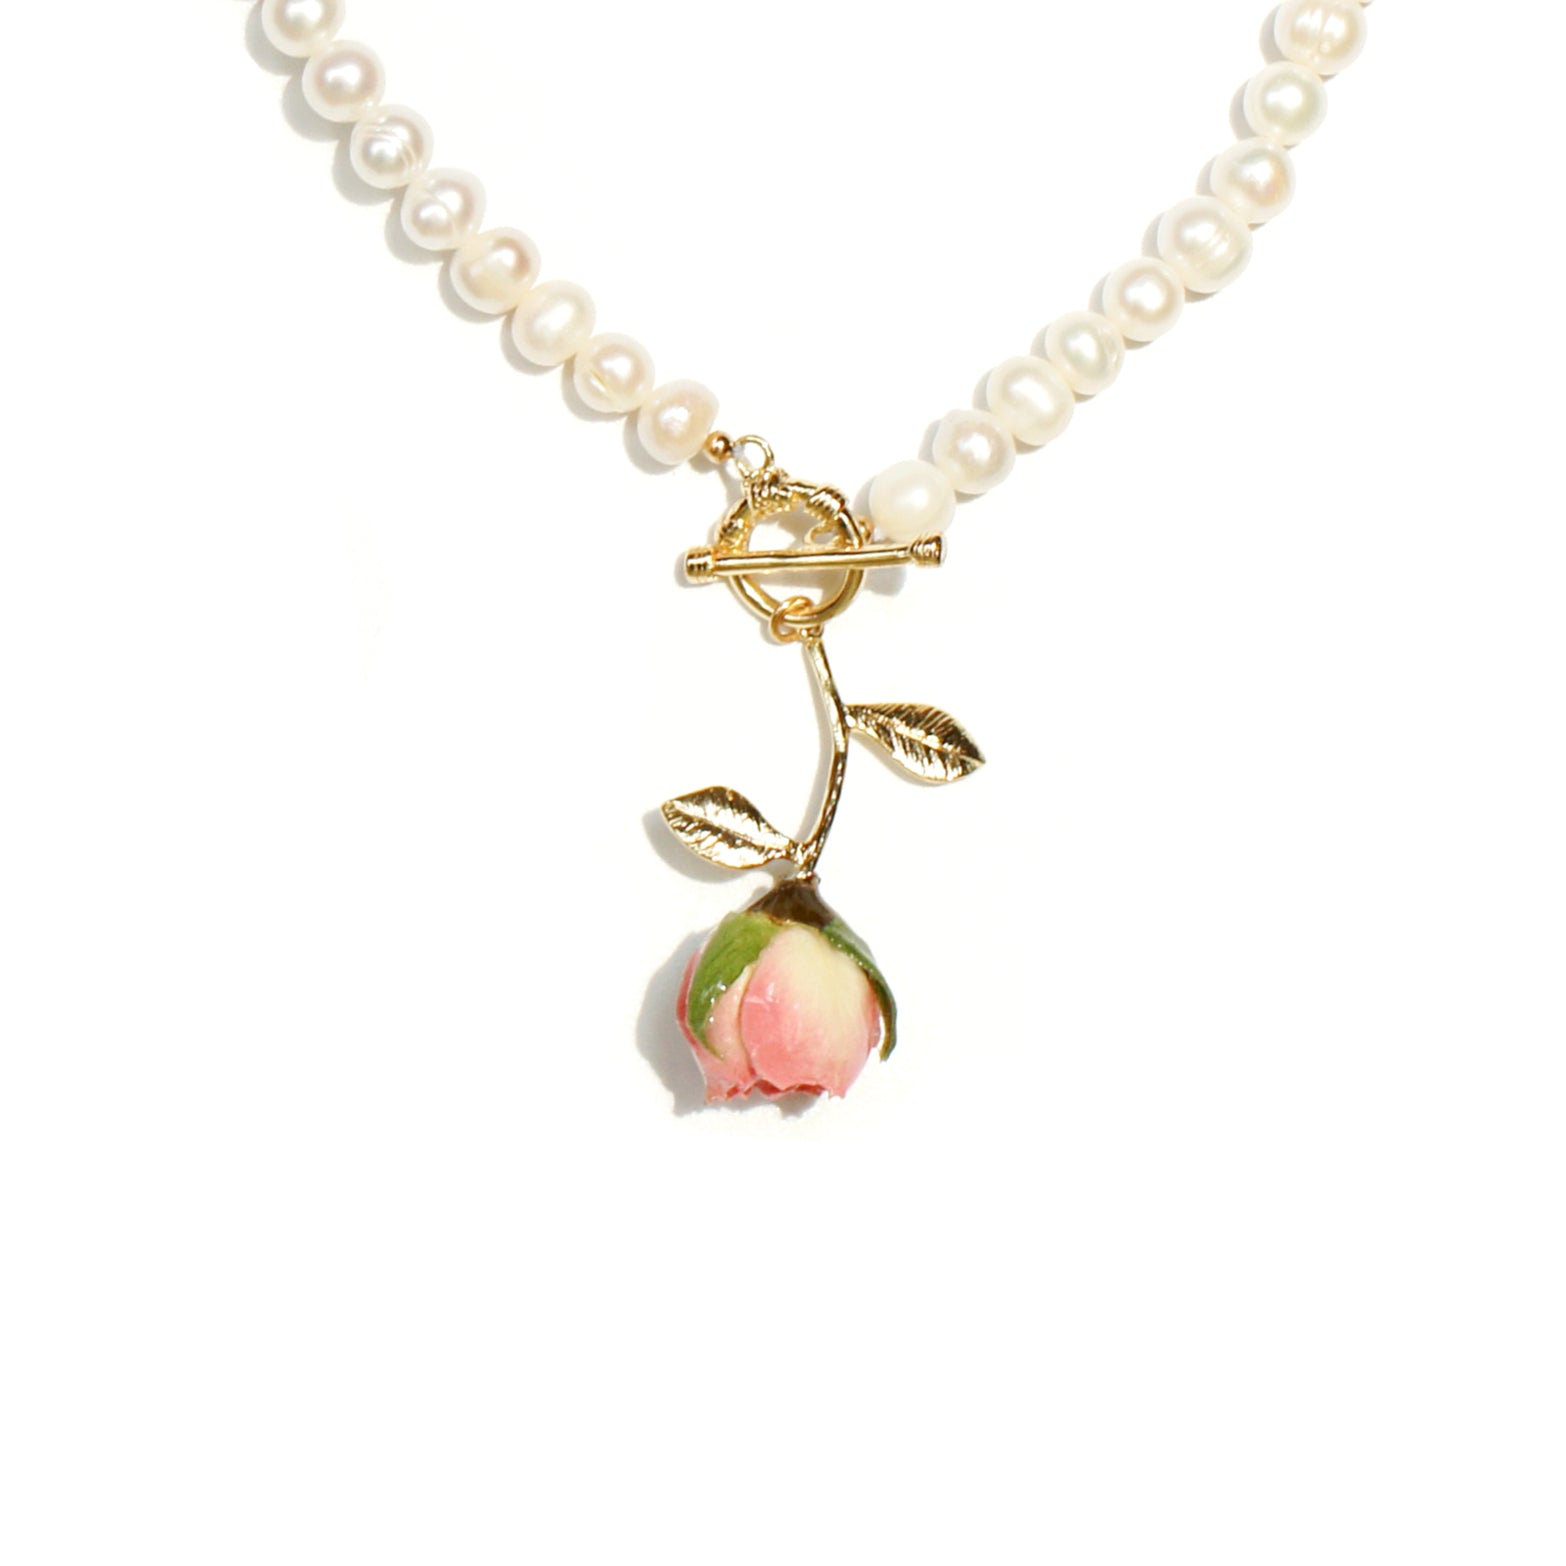 *REAL FLOWER* Bella Rosa Rosebud and Freshwater Pearl Necklace